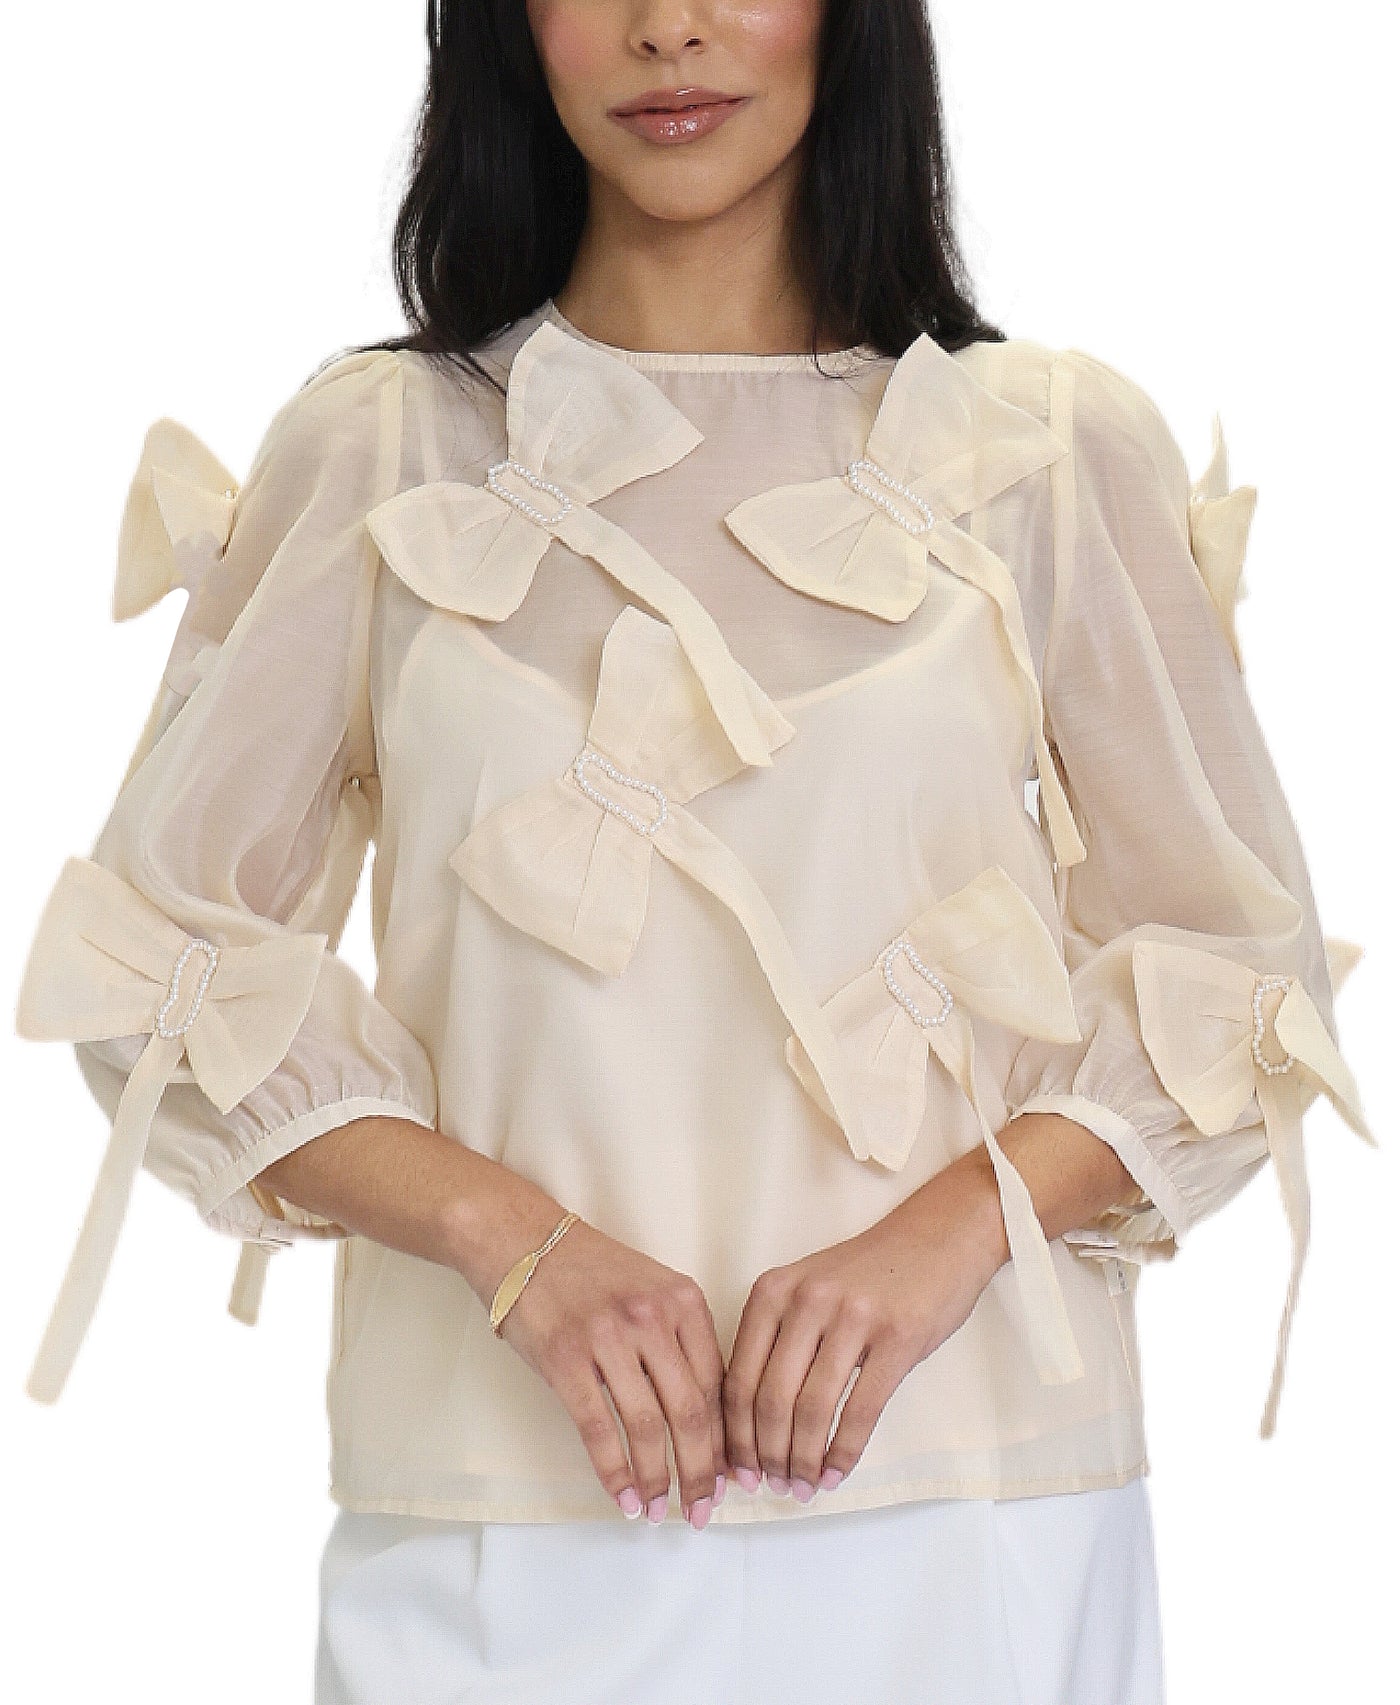 Blouse w/ Dimensional Pearl Bows image 1